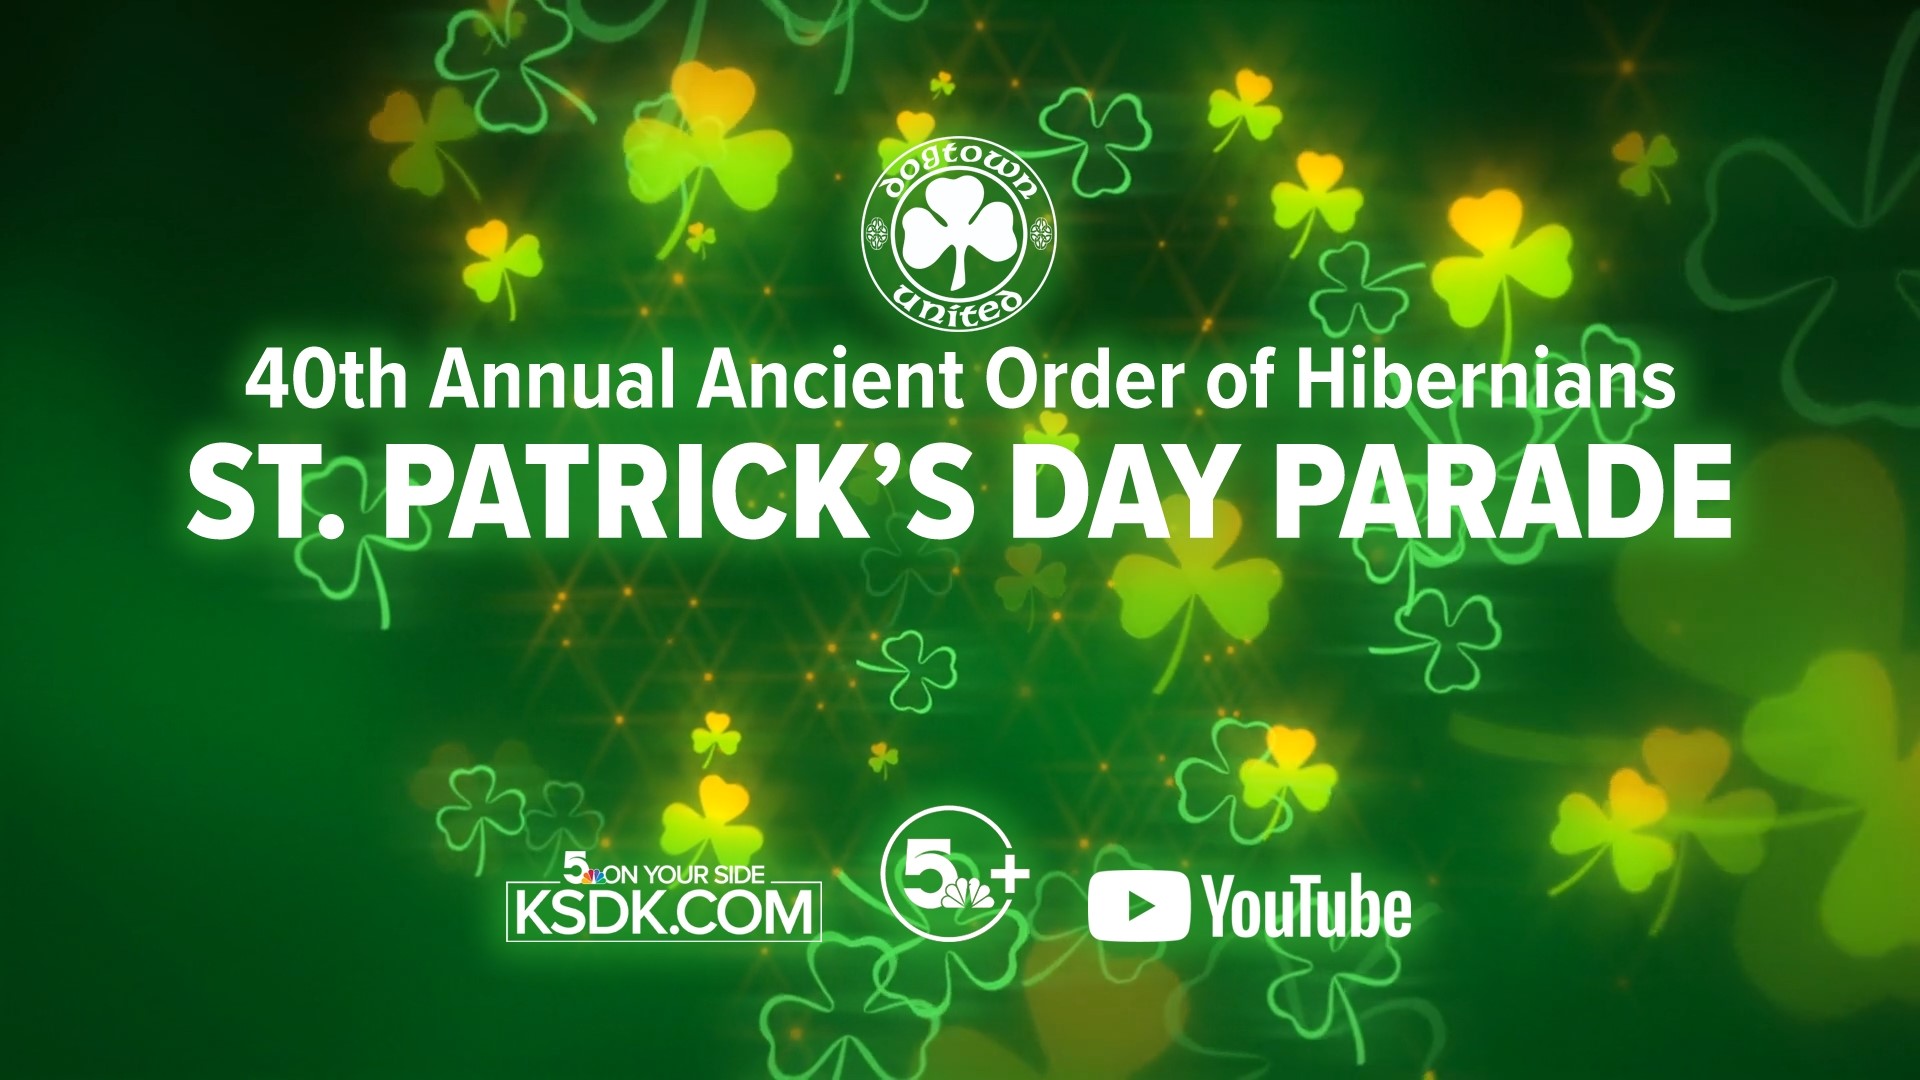 Watch coverage of the 40th annual Ancient Order of Hibernians St. Patrick's Day Parade from Dogtown in St. Louis.